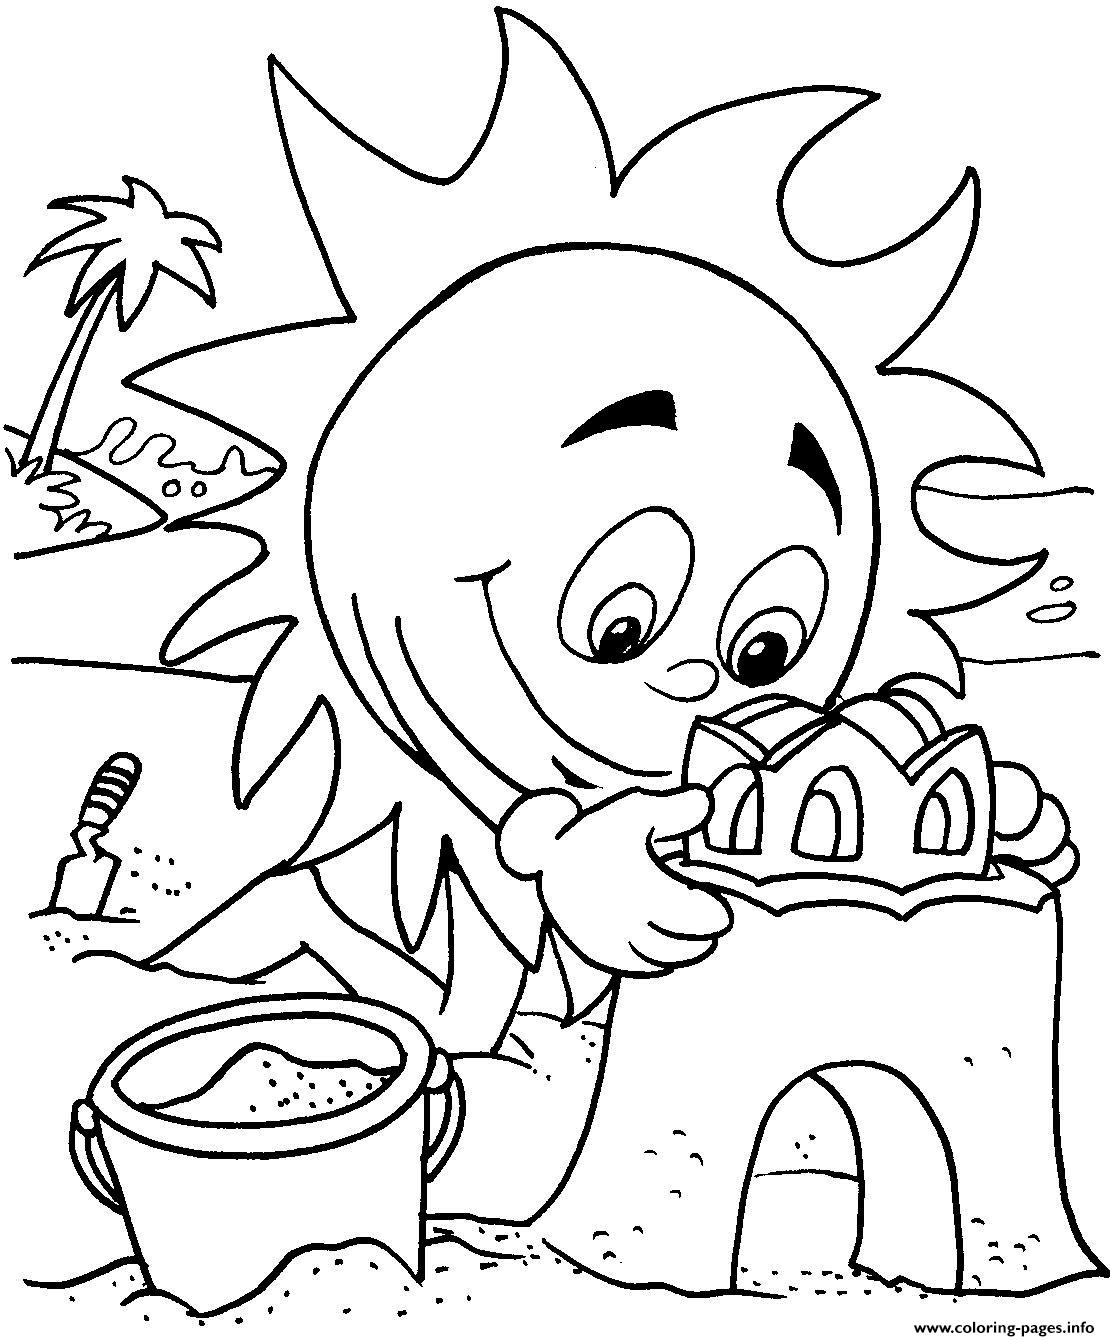 For Kids In The Summerbfa9 coloring